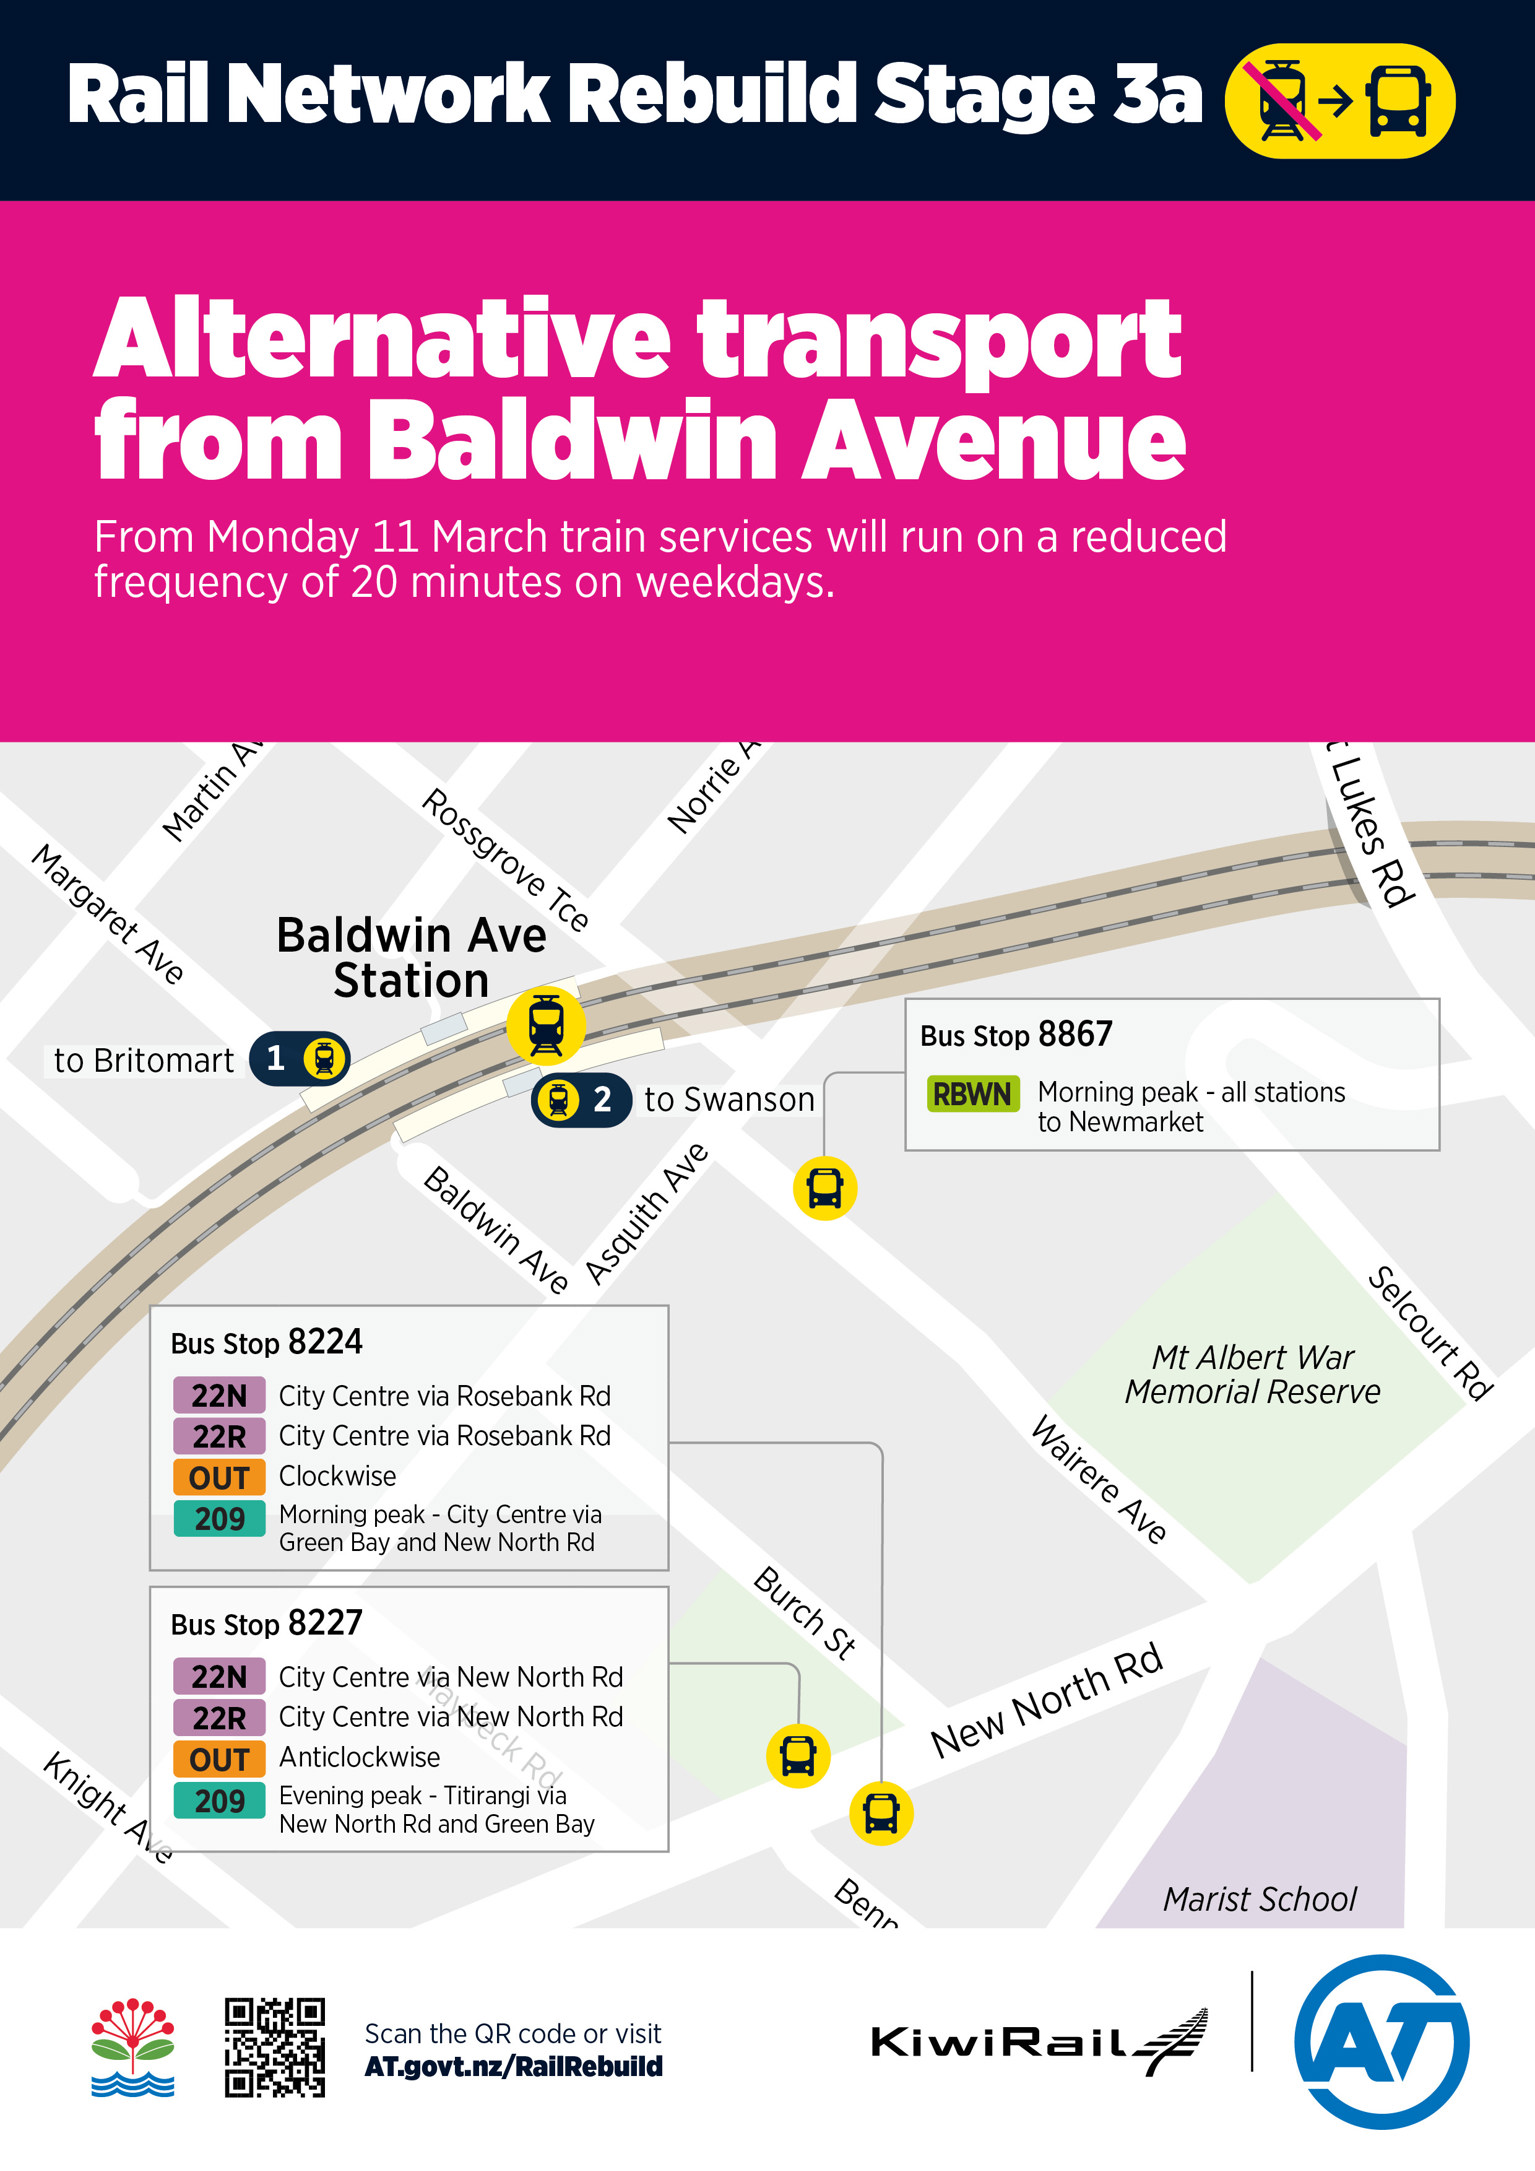 Poster showing alternative transport options from Baldwin Avenue Station during Stage 3 of the Rail Network Rebuild